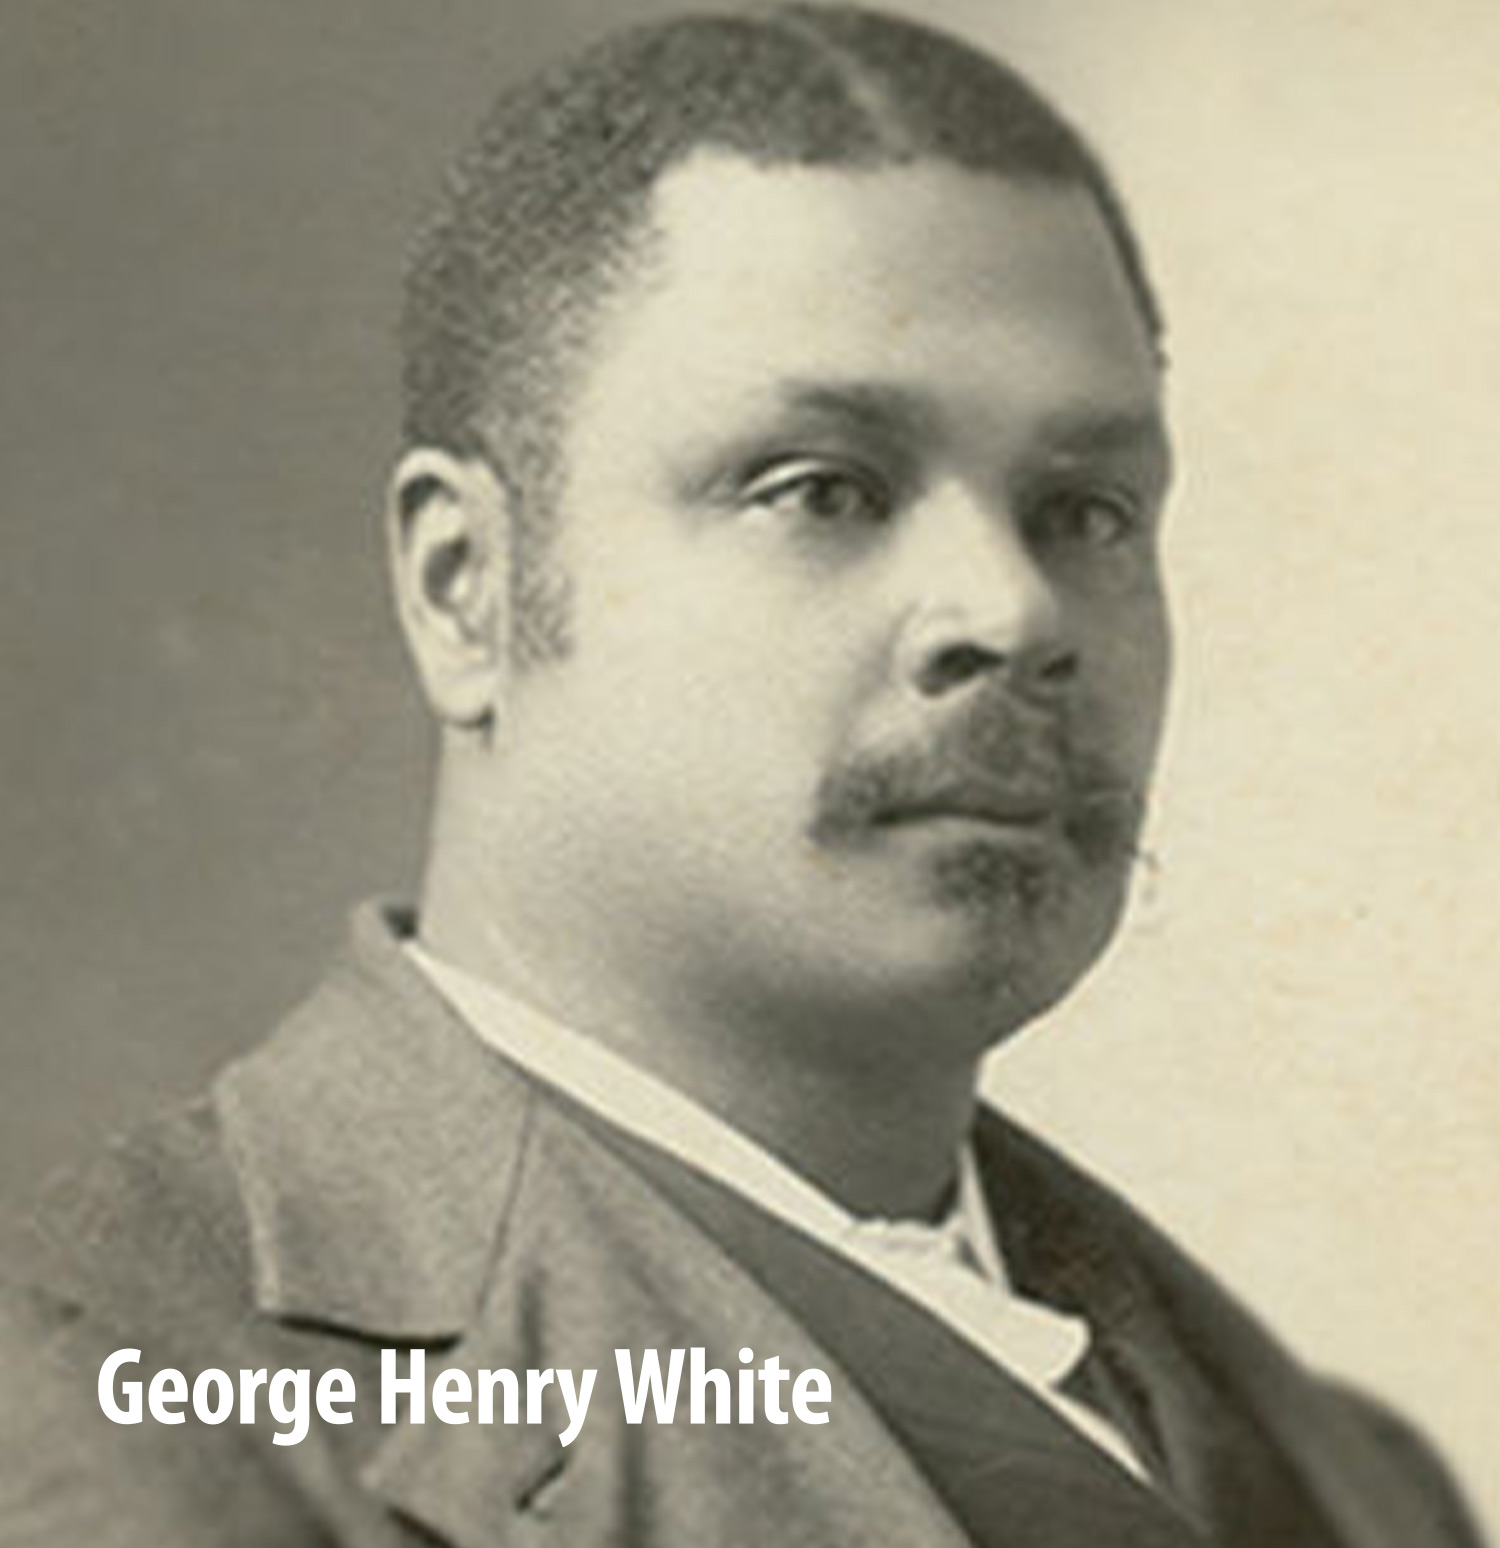 black and white portrait photograph of George Henry White